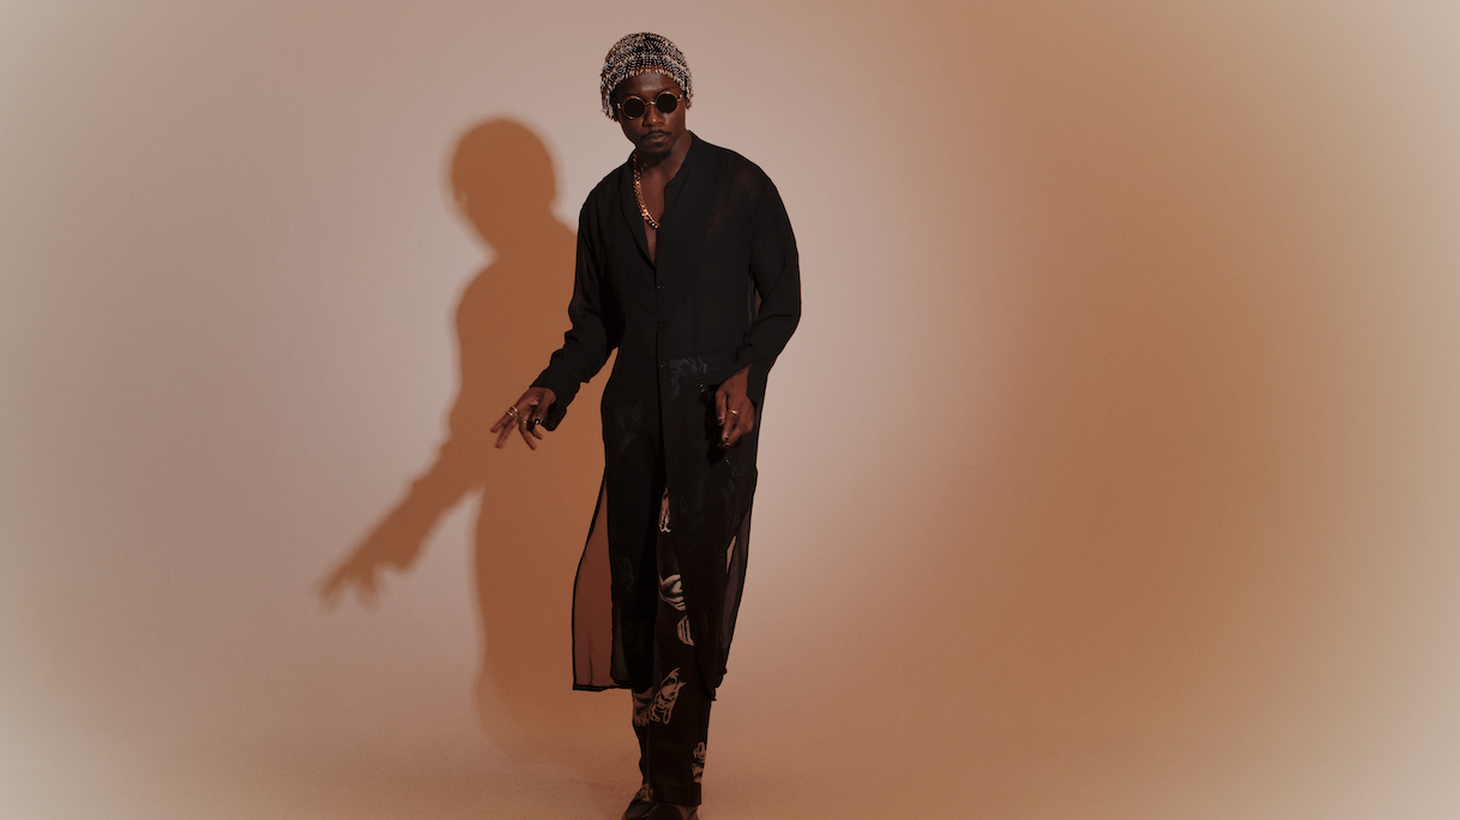 To celebrate our visit with Compton innovator Channel Tres today on MBE, we share his new single “6am,” a driving, high-energy bounce intended to simulate a night out in his hometown that doesn’t let up until dawn.